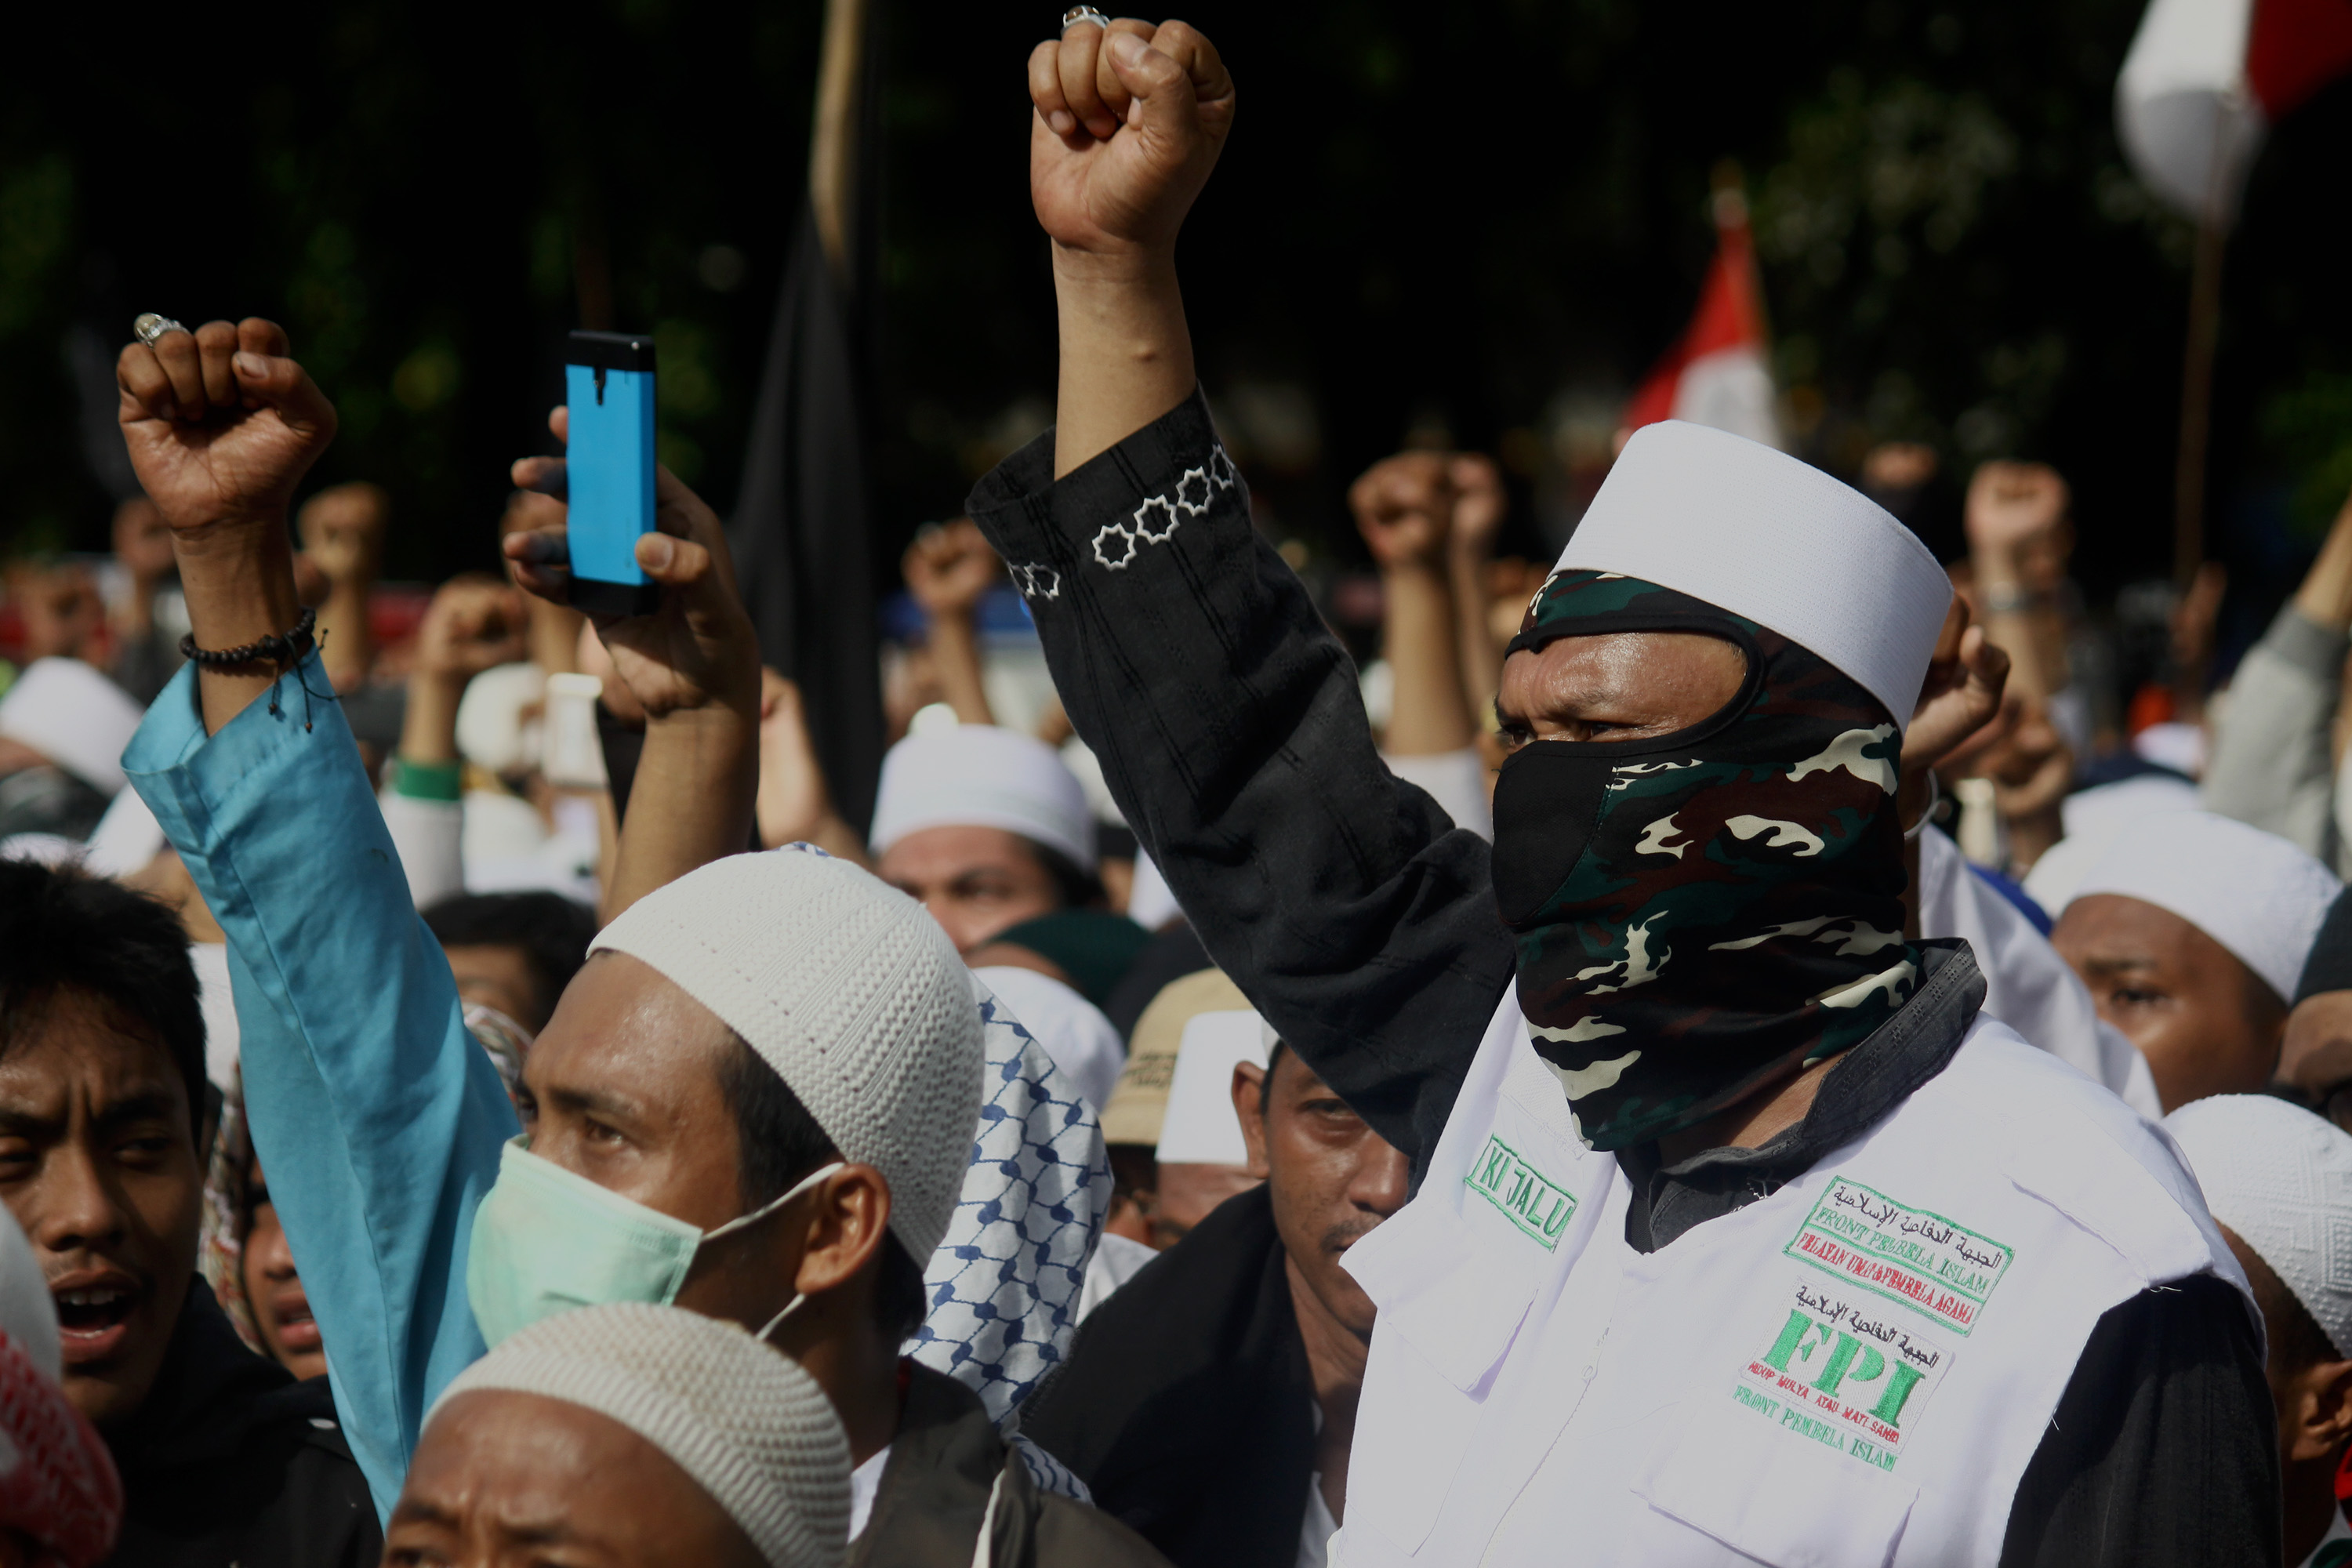 Thousands of Muslims hold a demonstration in front of the Jakarta Metropolitan Police Headquarters on Jan. 23, 2017, in Jakarta (Tubagus Aditya Irawan—Pacific Press/LightRocket/Getty Images)